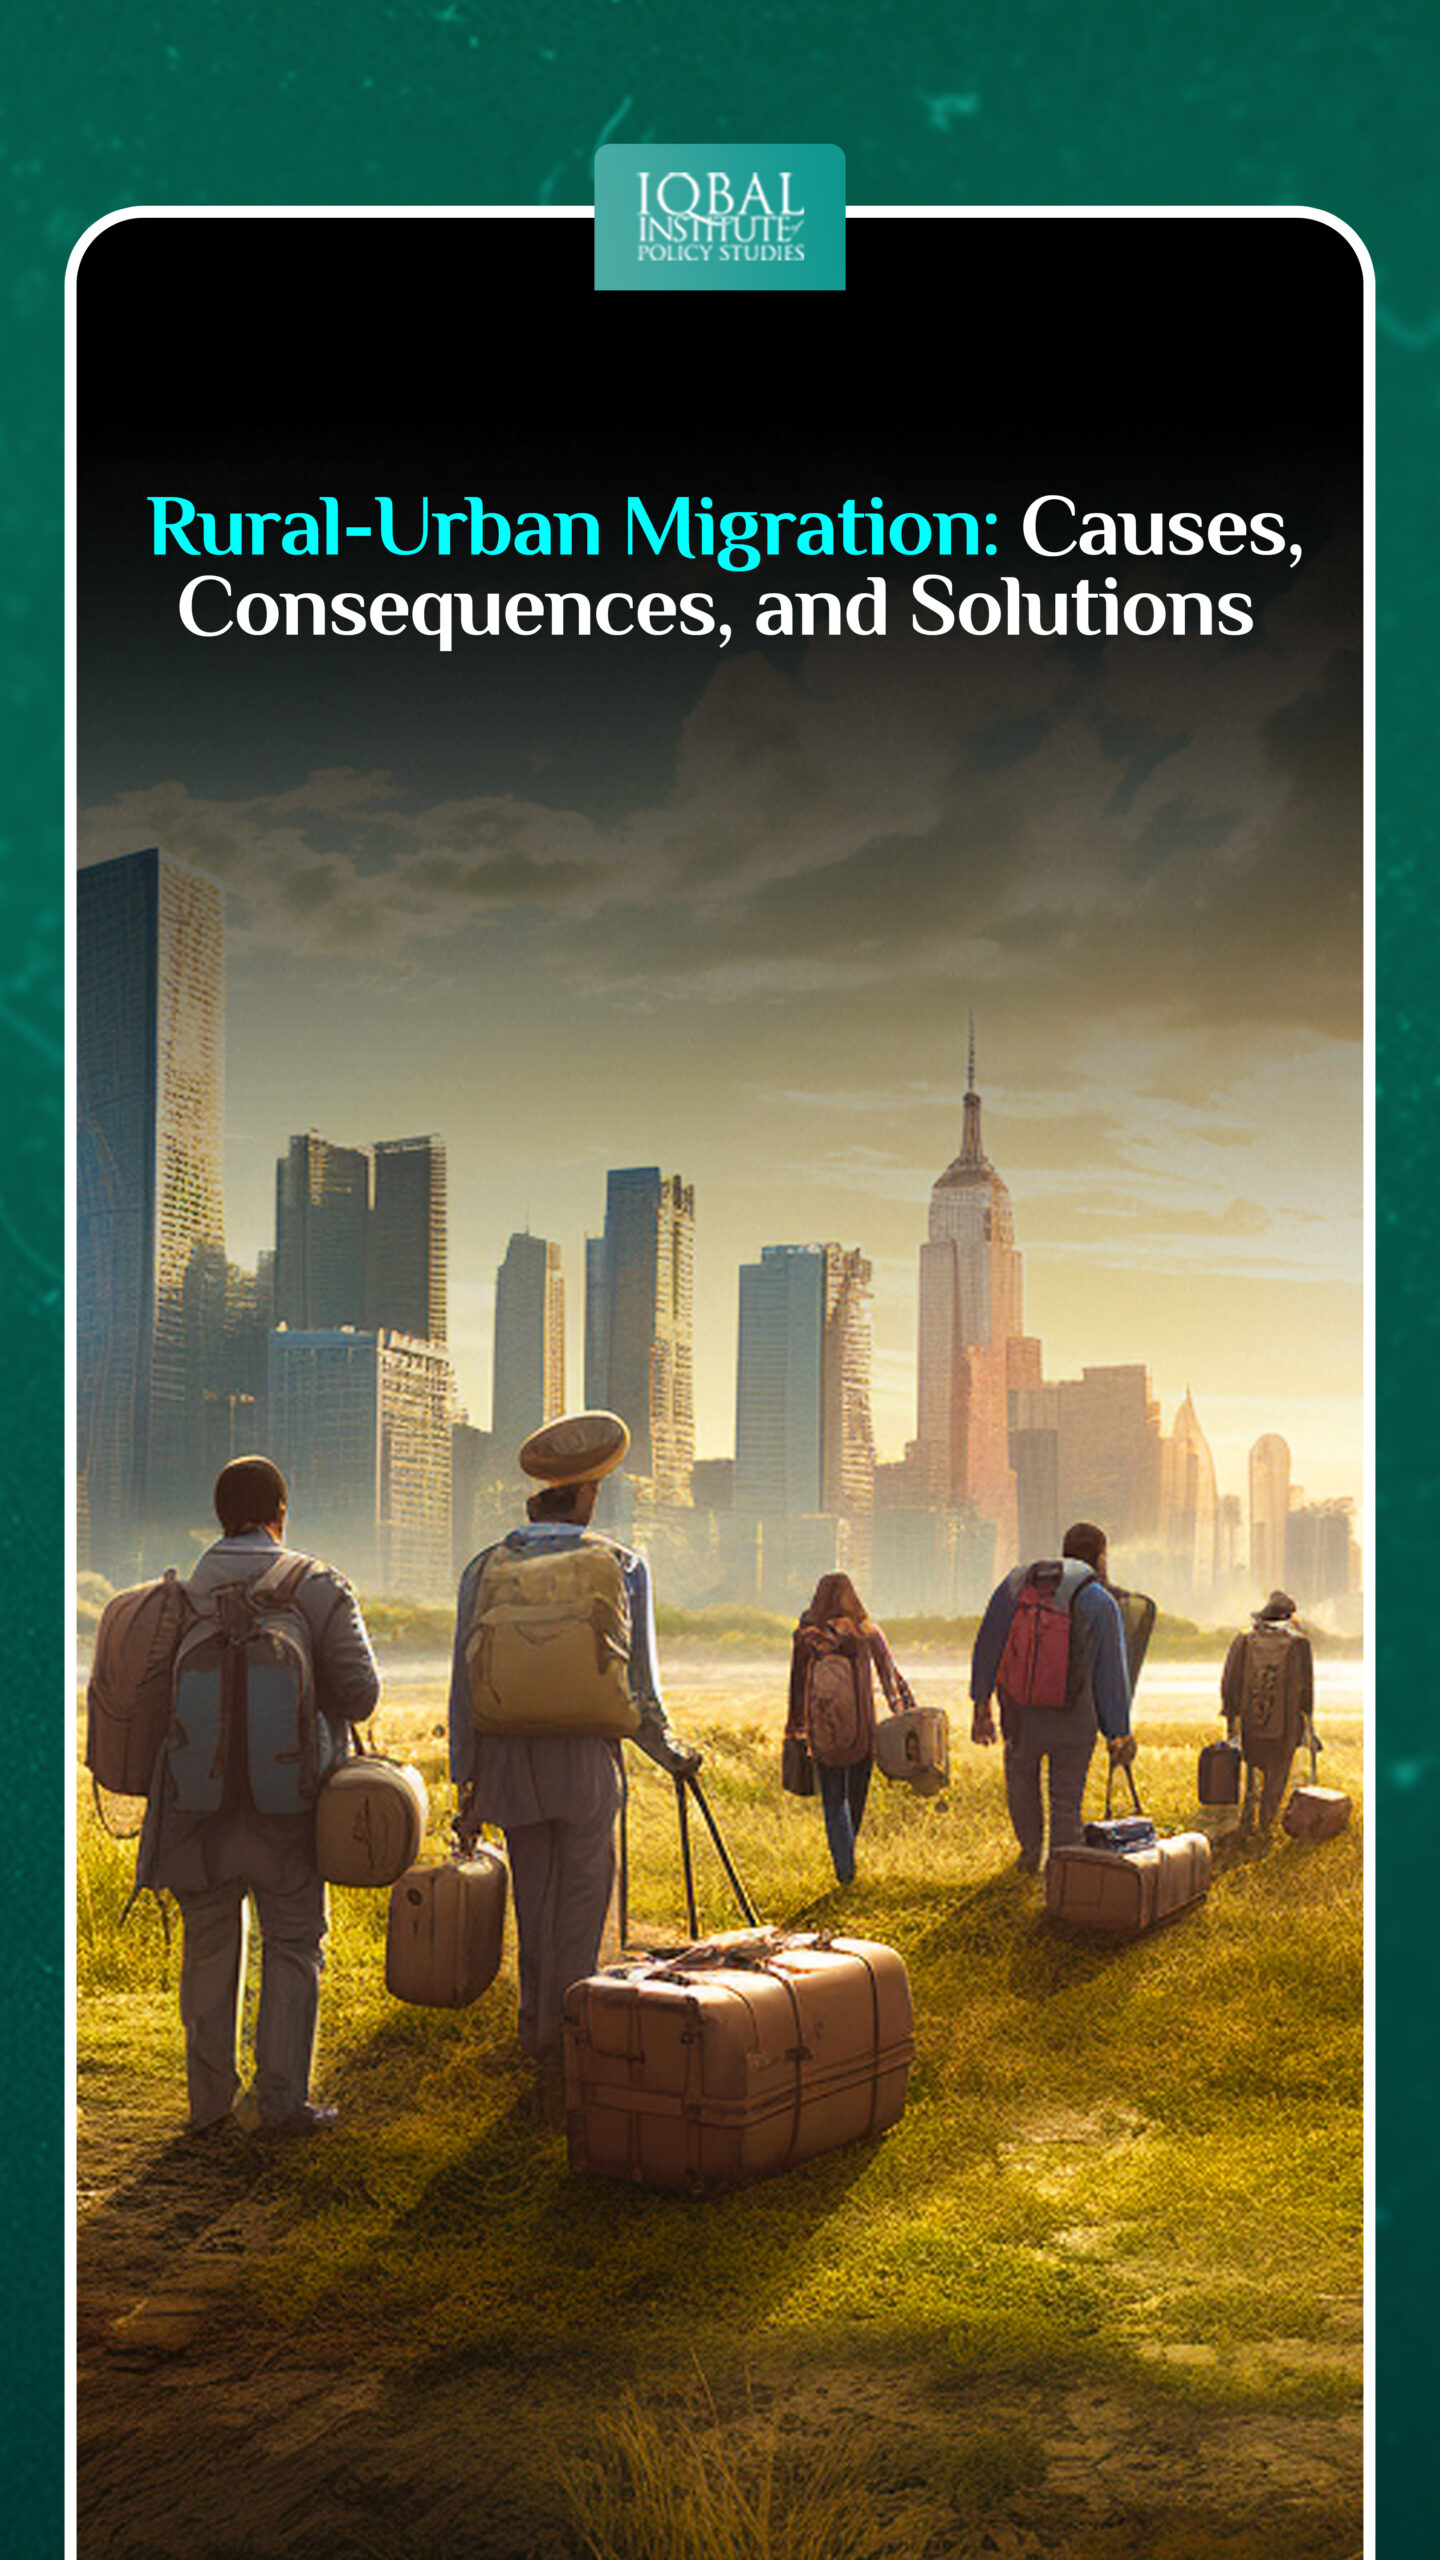 Rural-Urban Migration: Causes, Consequences, and Solutions